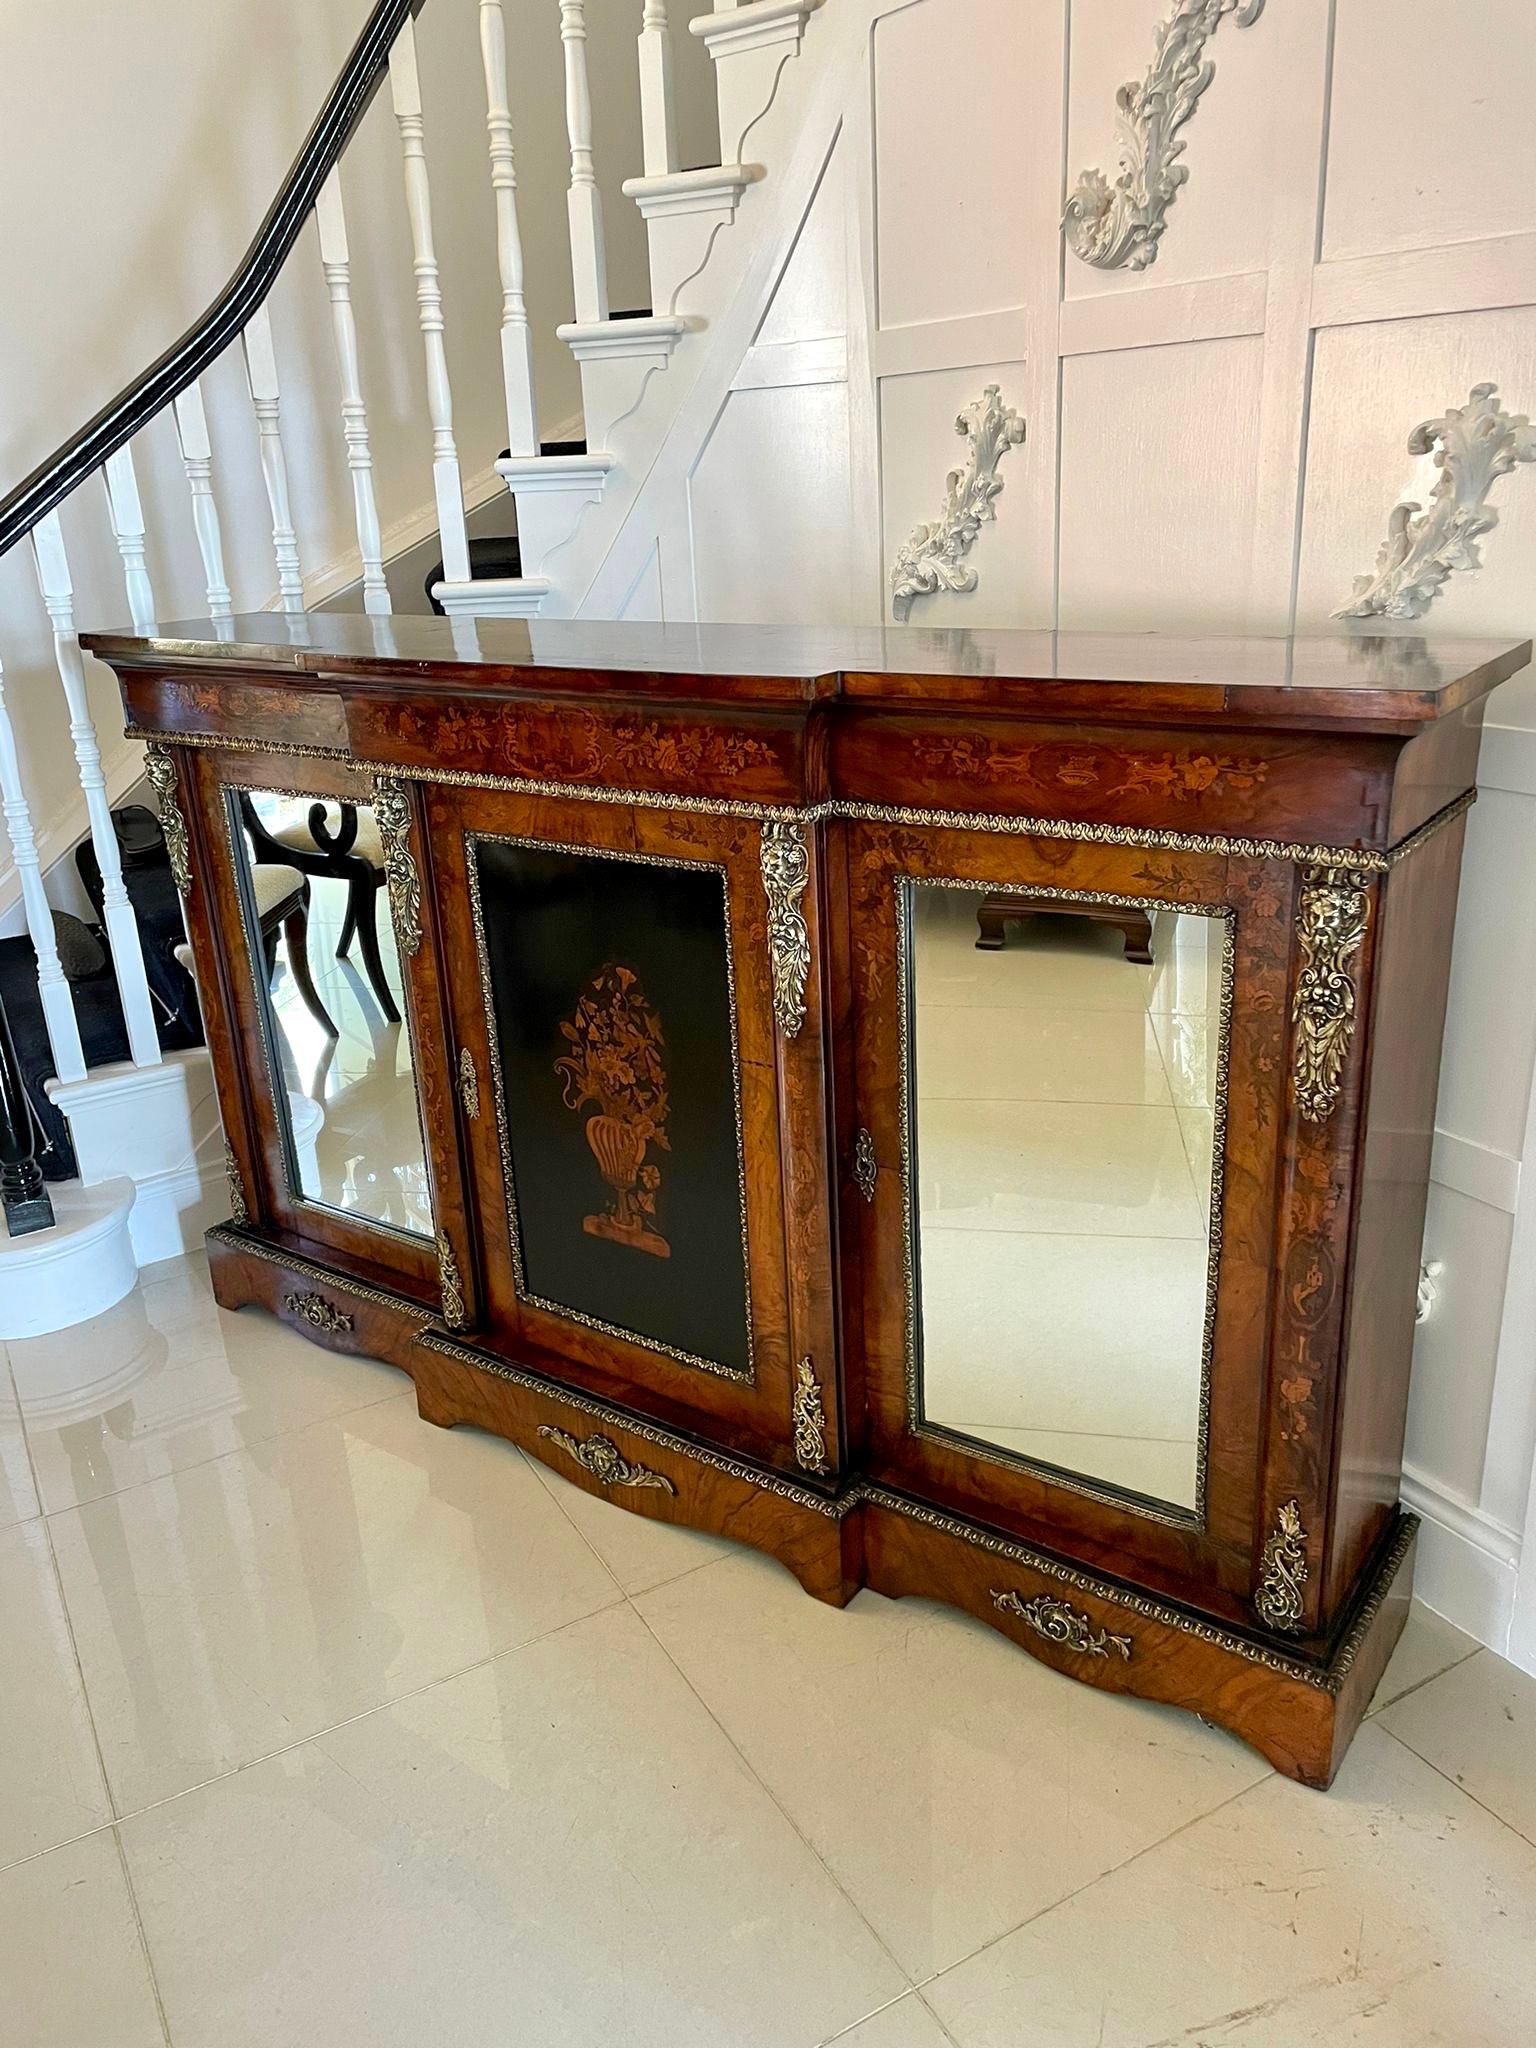 Outstanding quality large antique Victorian inlaid floral marquetry burr walnut ormolu mounted credenza having a quality burr walnut breakfront top above a pretty inlaid floral marquetry shaped frieze above three doors, the centre door having an